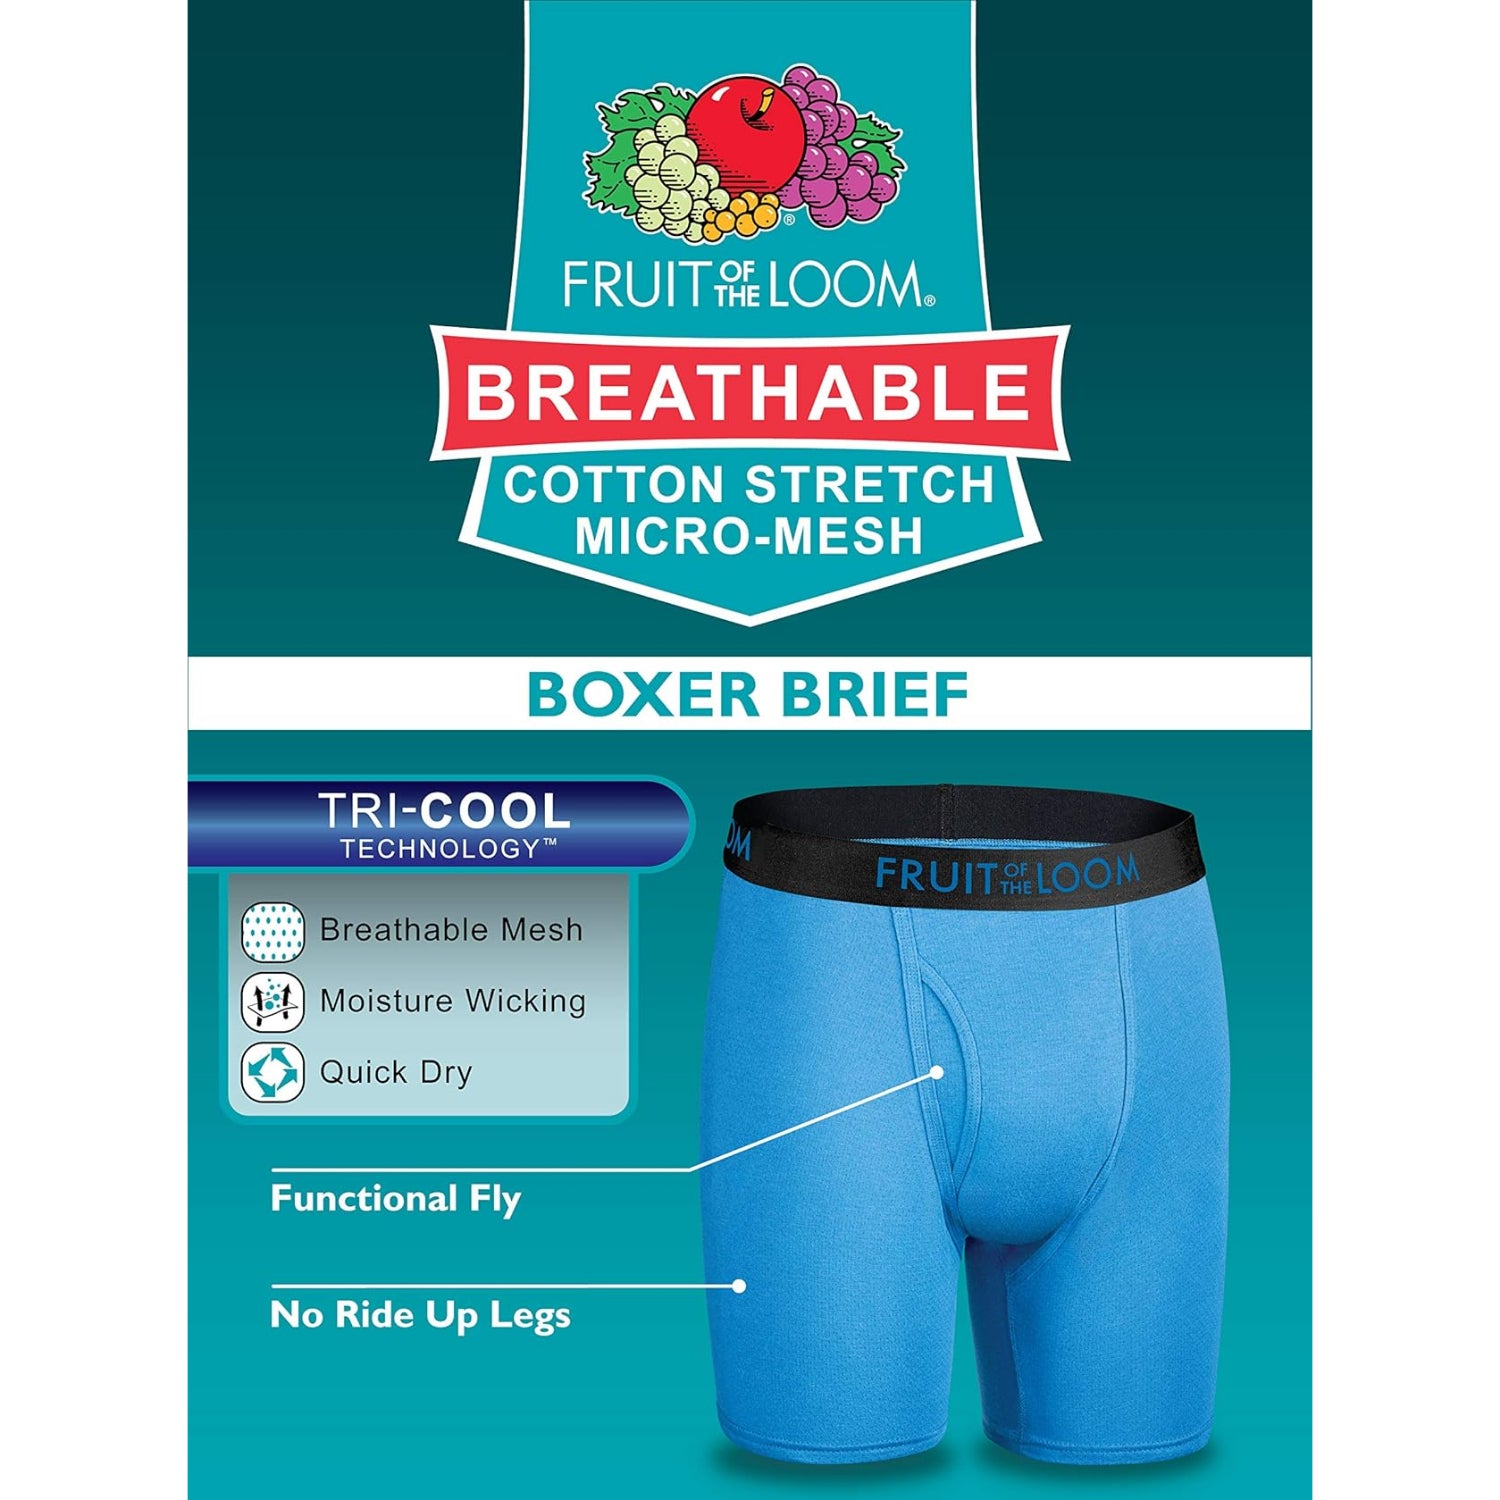 Fruit of the Loom Mens 360 Stretch Boxer Briefs, 7-Pack – S&D Kids